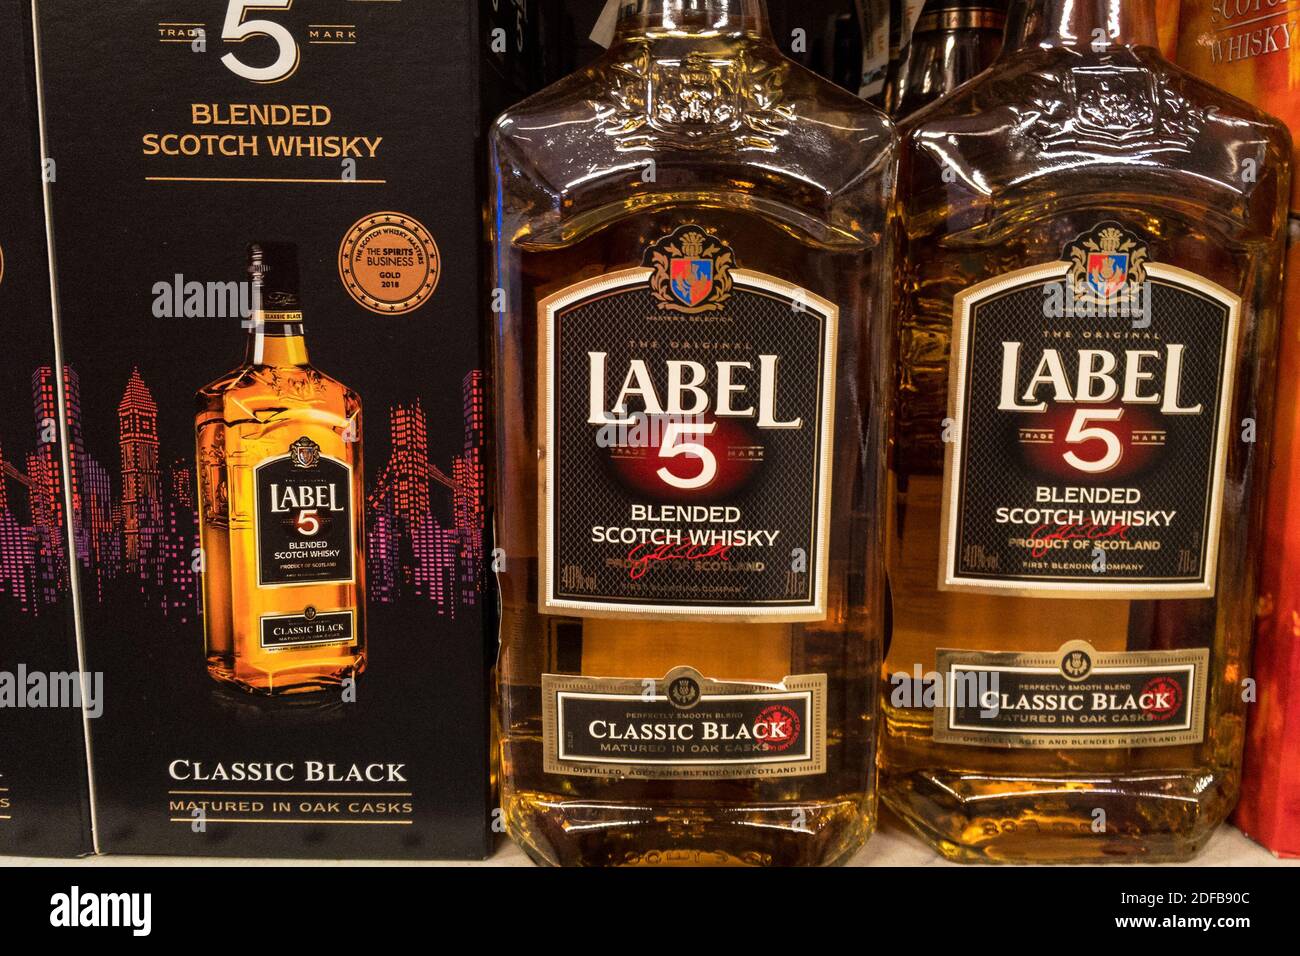 BELGRADE, SERBIA - NOVEMBER 15, 2020: Label 5 Whisky logo on some bottles  for sale. Label 5 is a brand of blended Scotch Whisky produced by the group  Stock Photo - Alamy